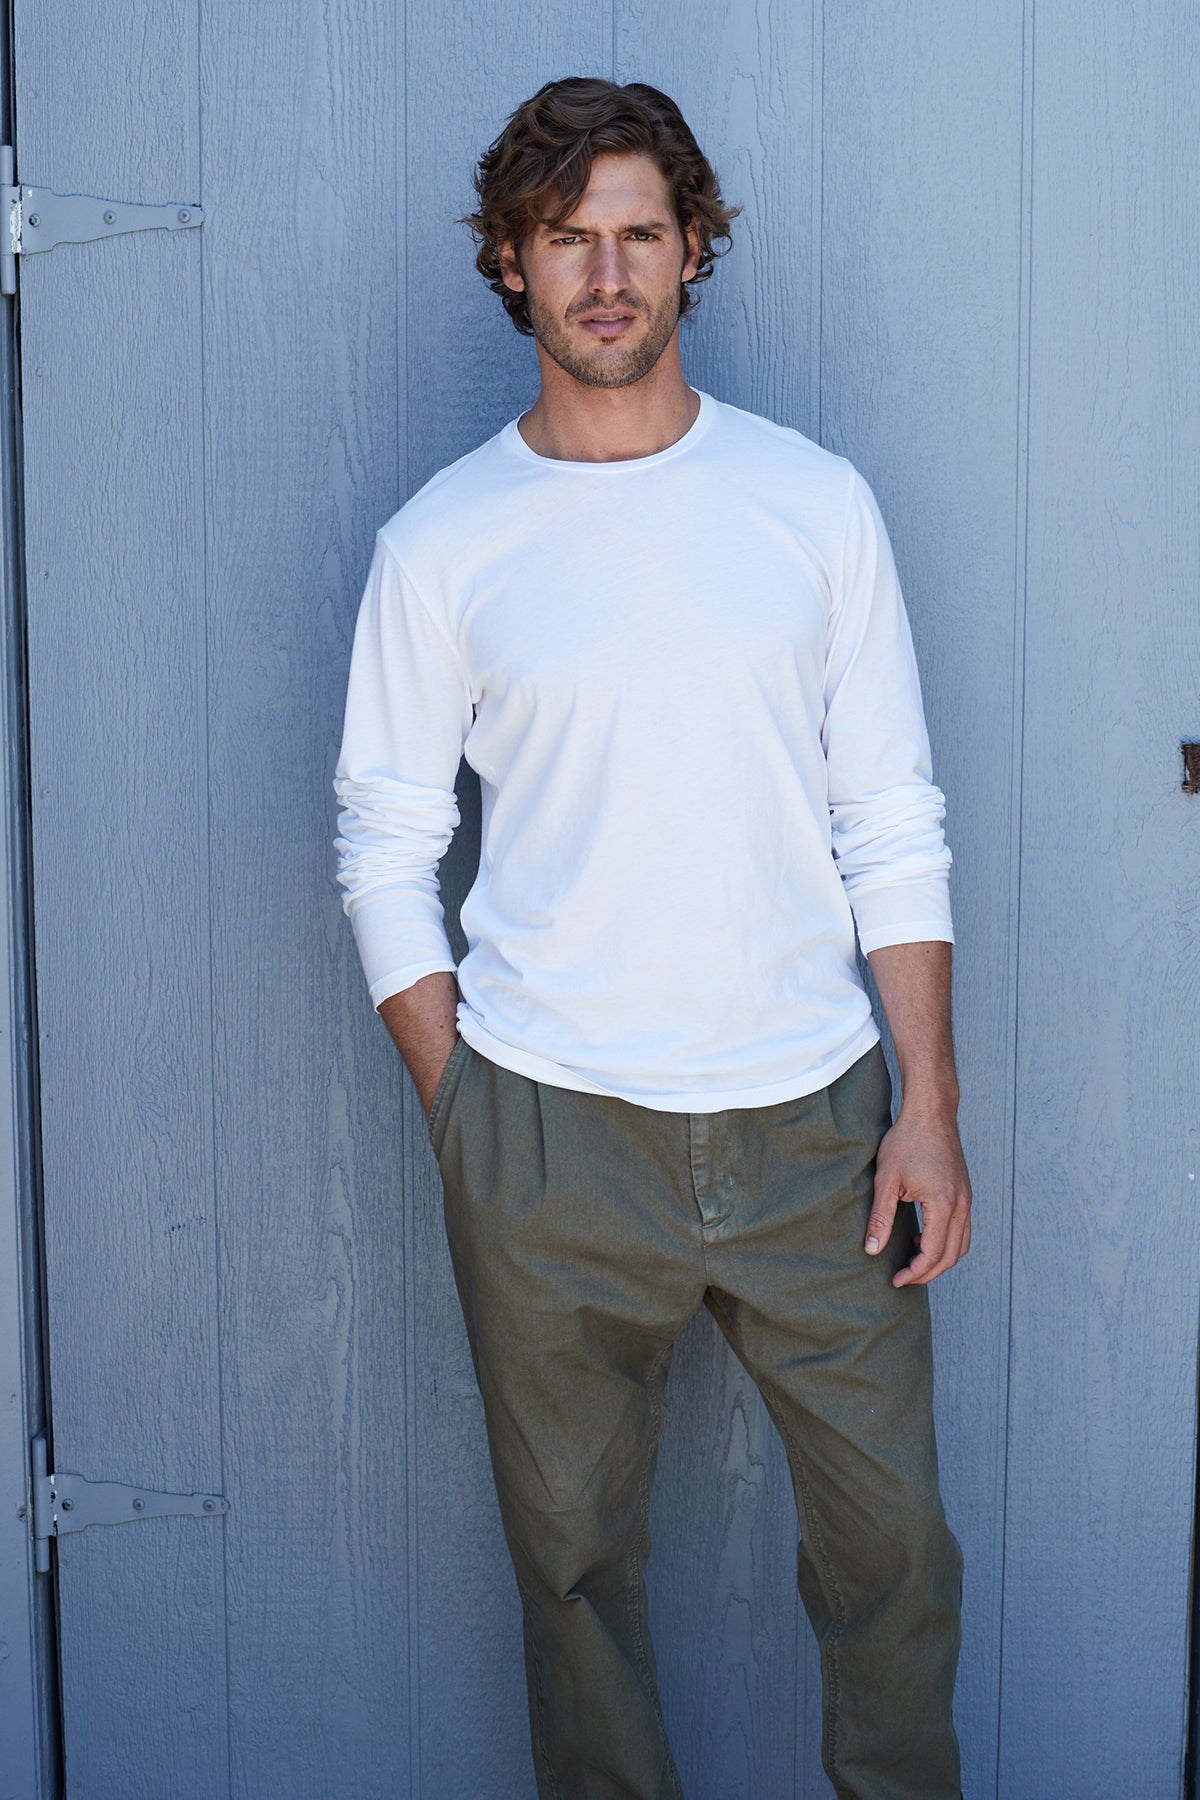 Skeeter Whisper Classic Crew Neck Tee in White with Vinny Pant Front-25167476457665